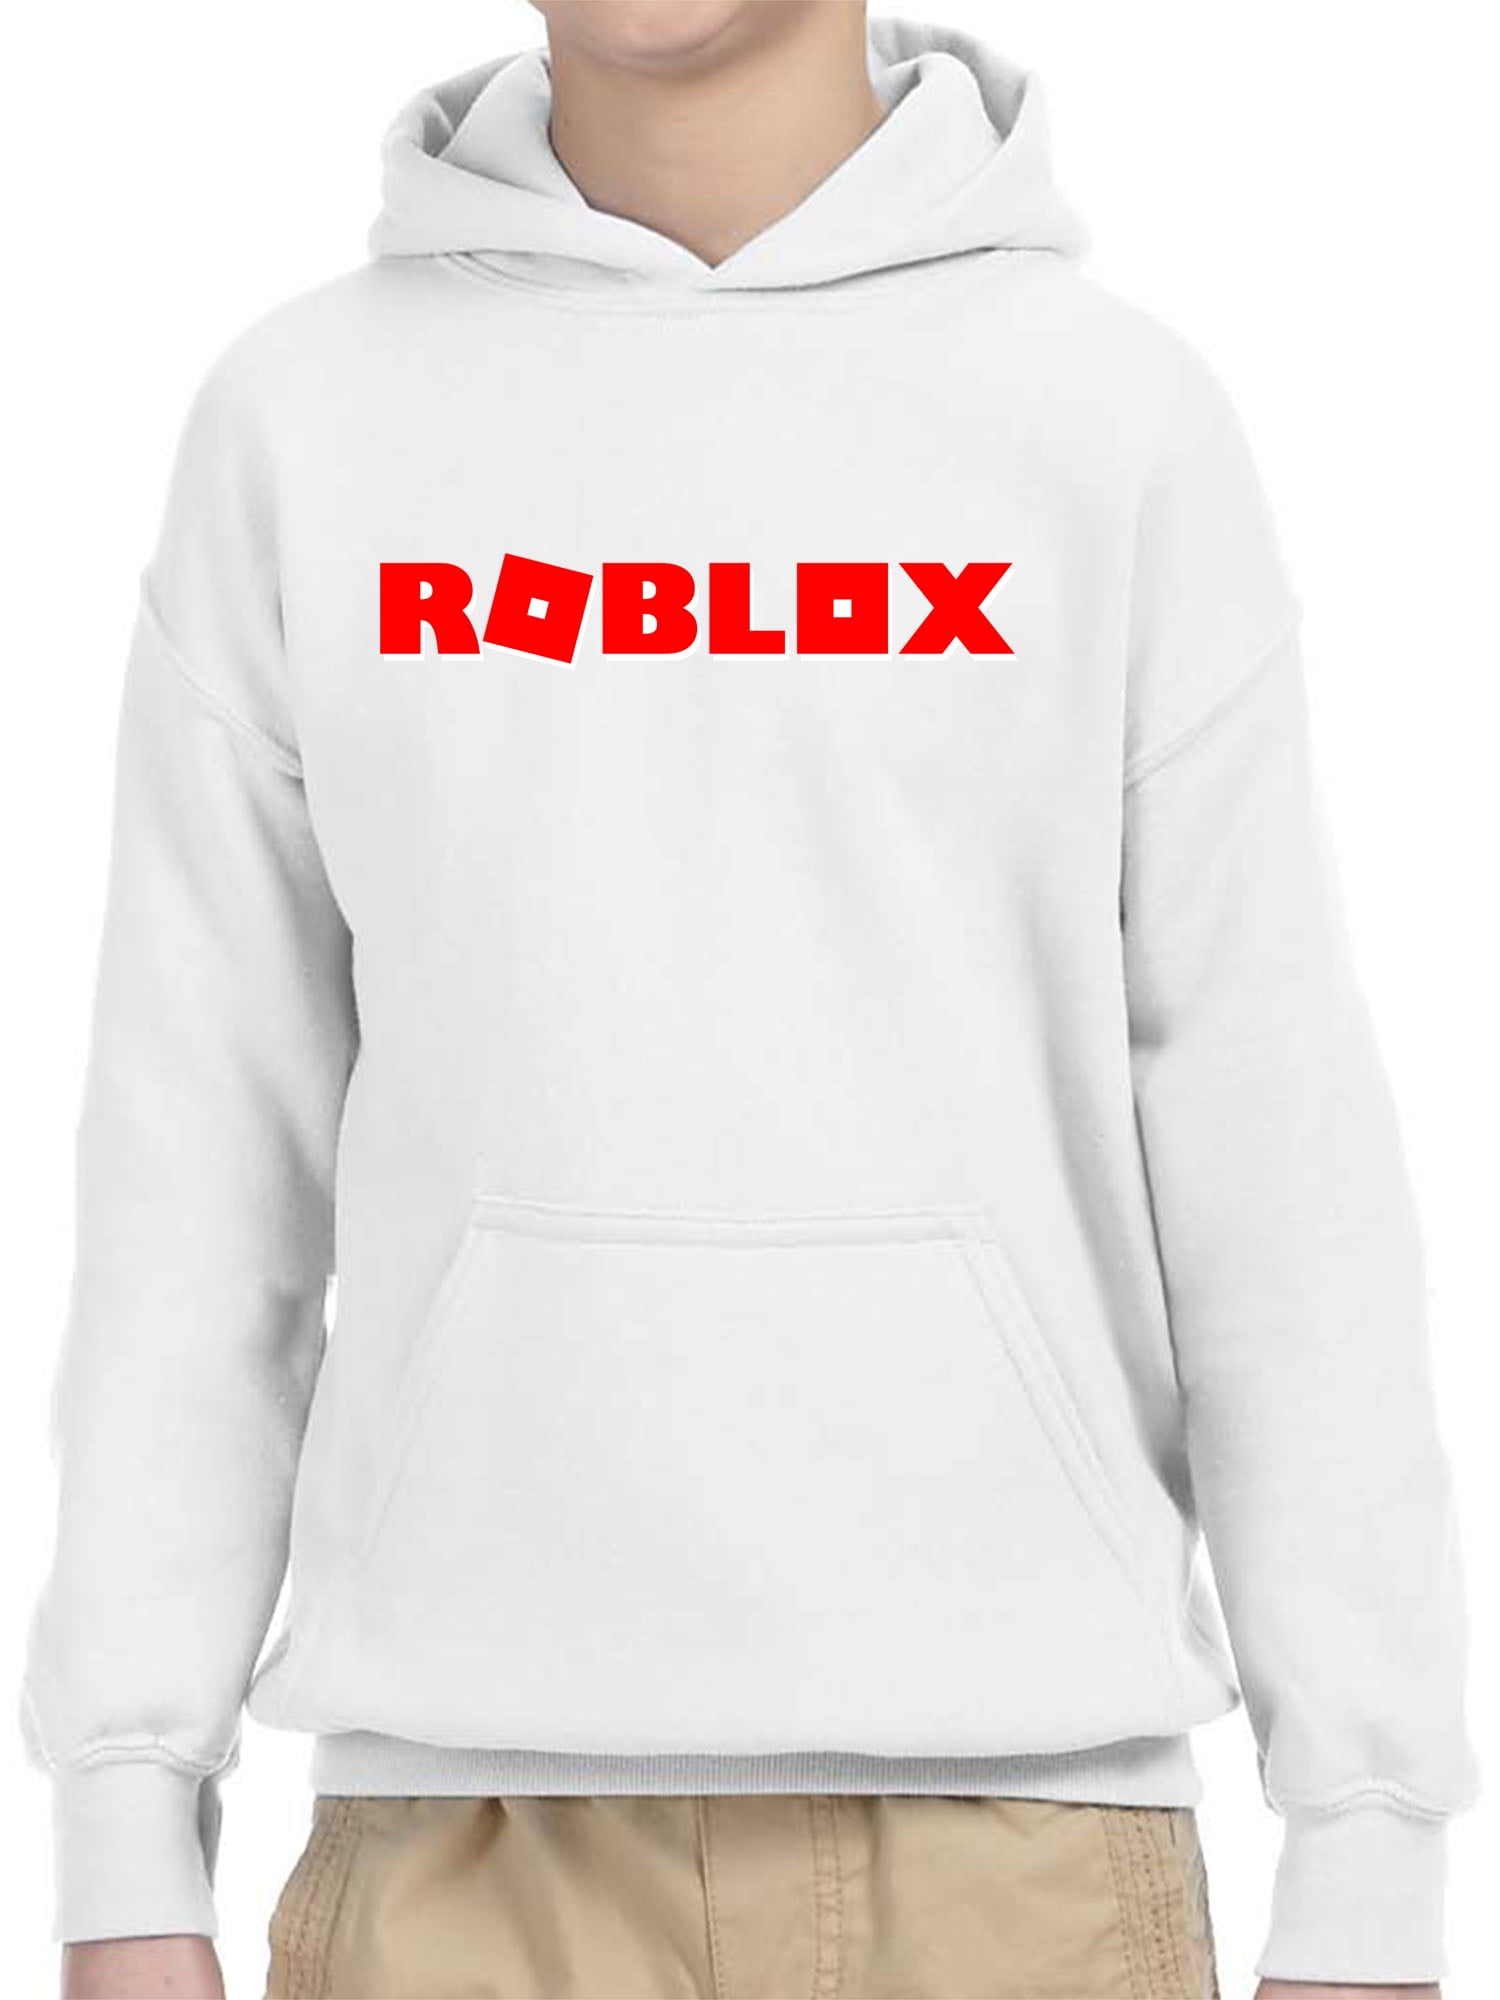 Download Black Sweater With White Strings Roblox - All Working ...